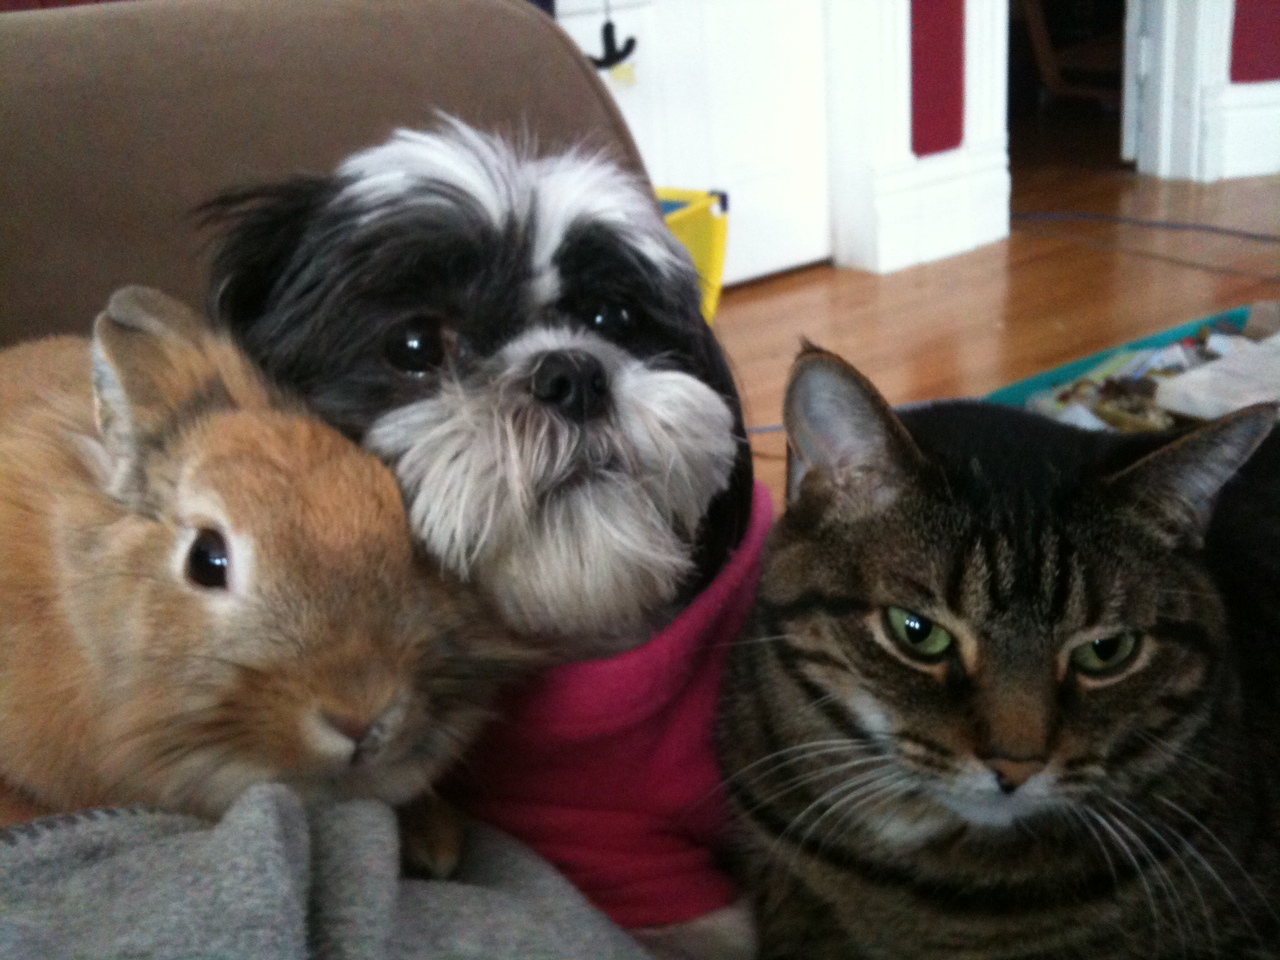 Bunny and Her Furry Friends All Heard the Word "Treat"